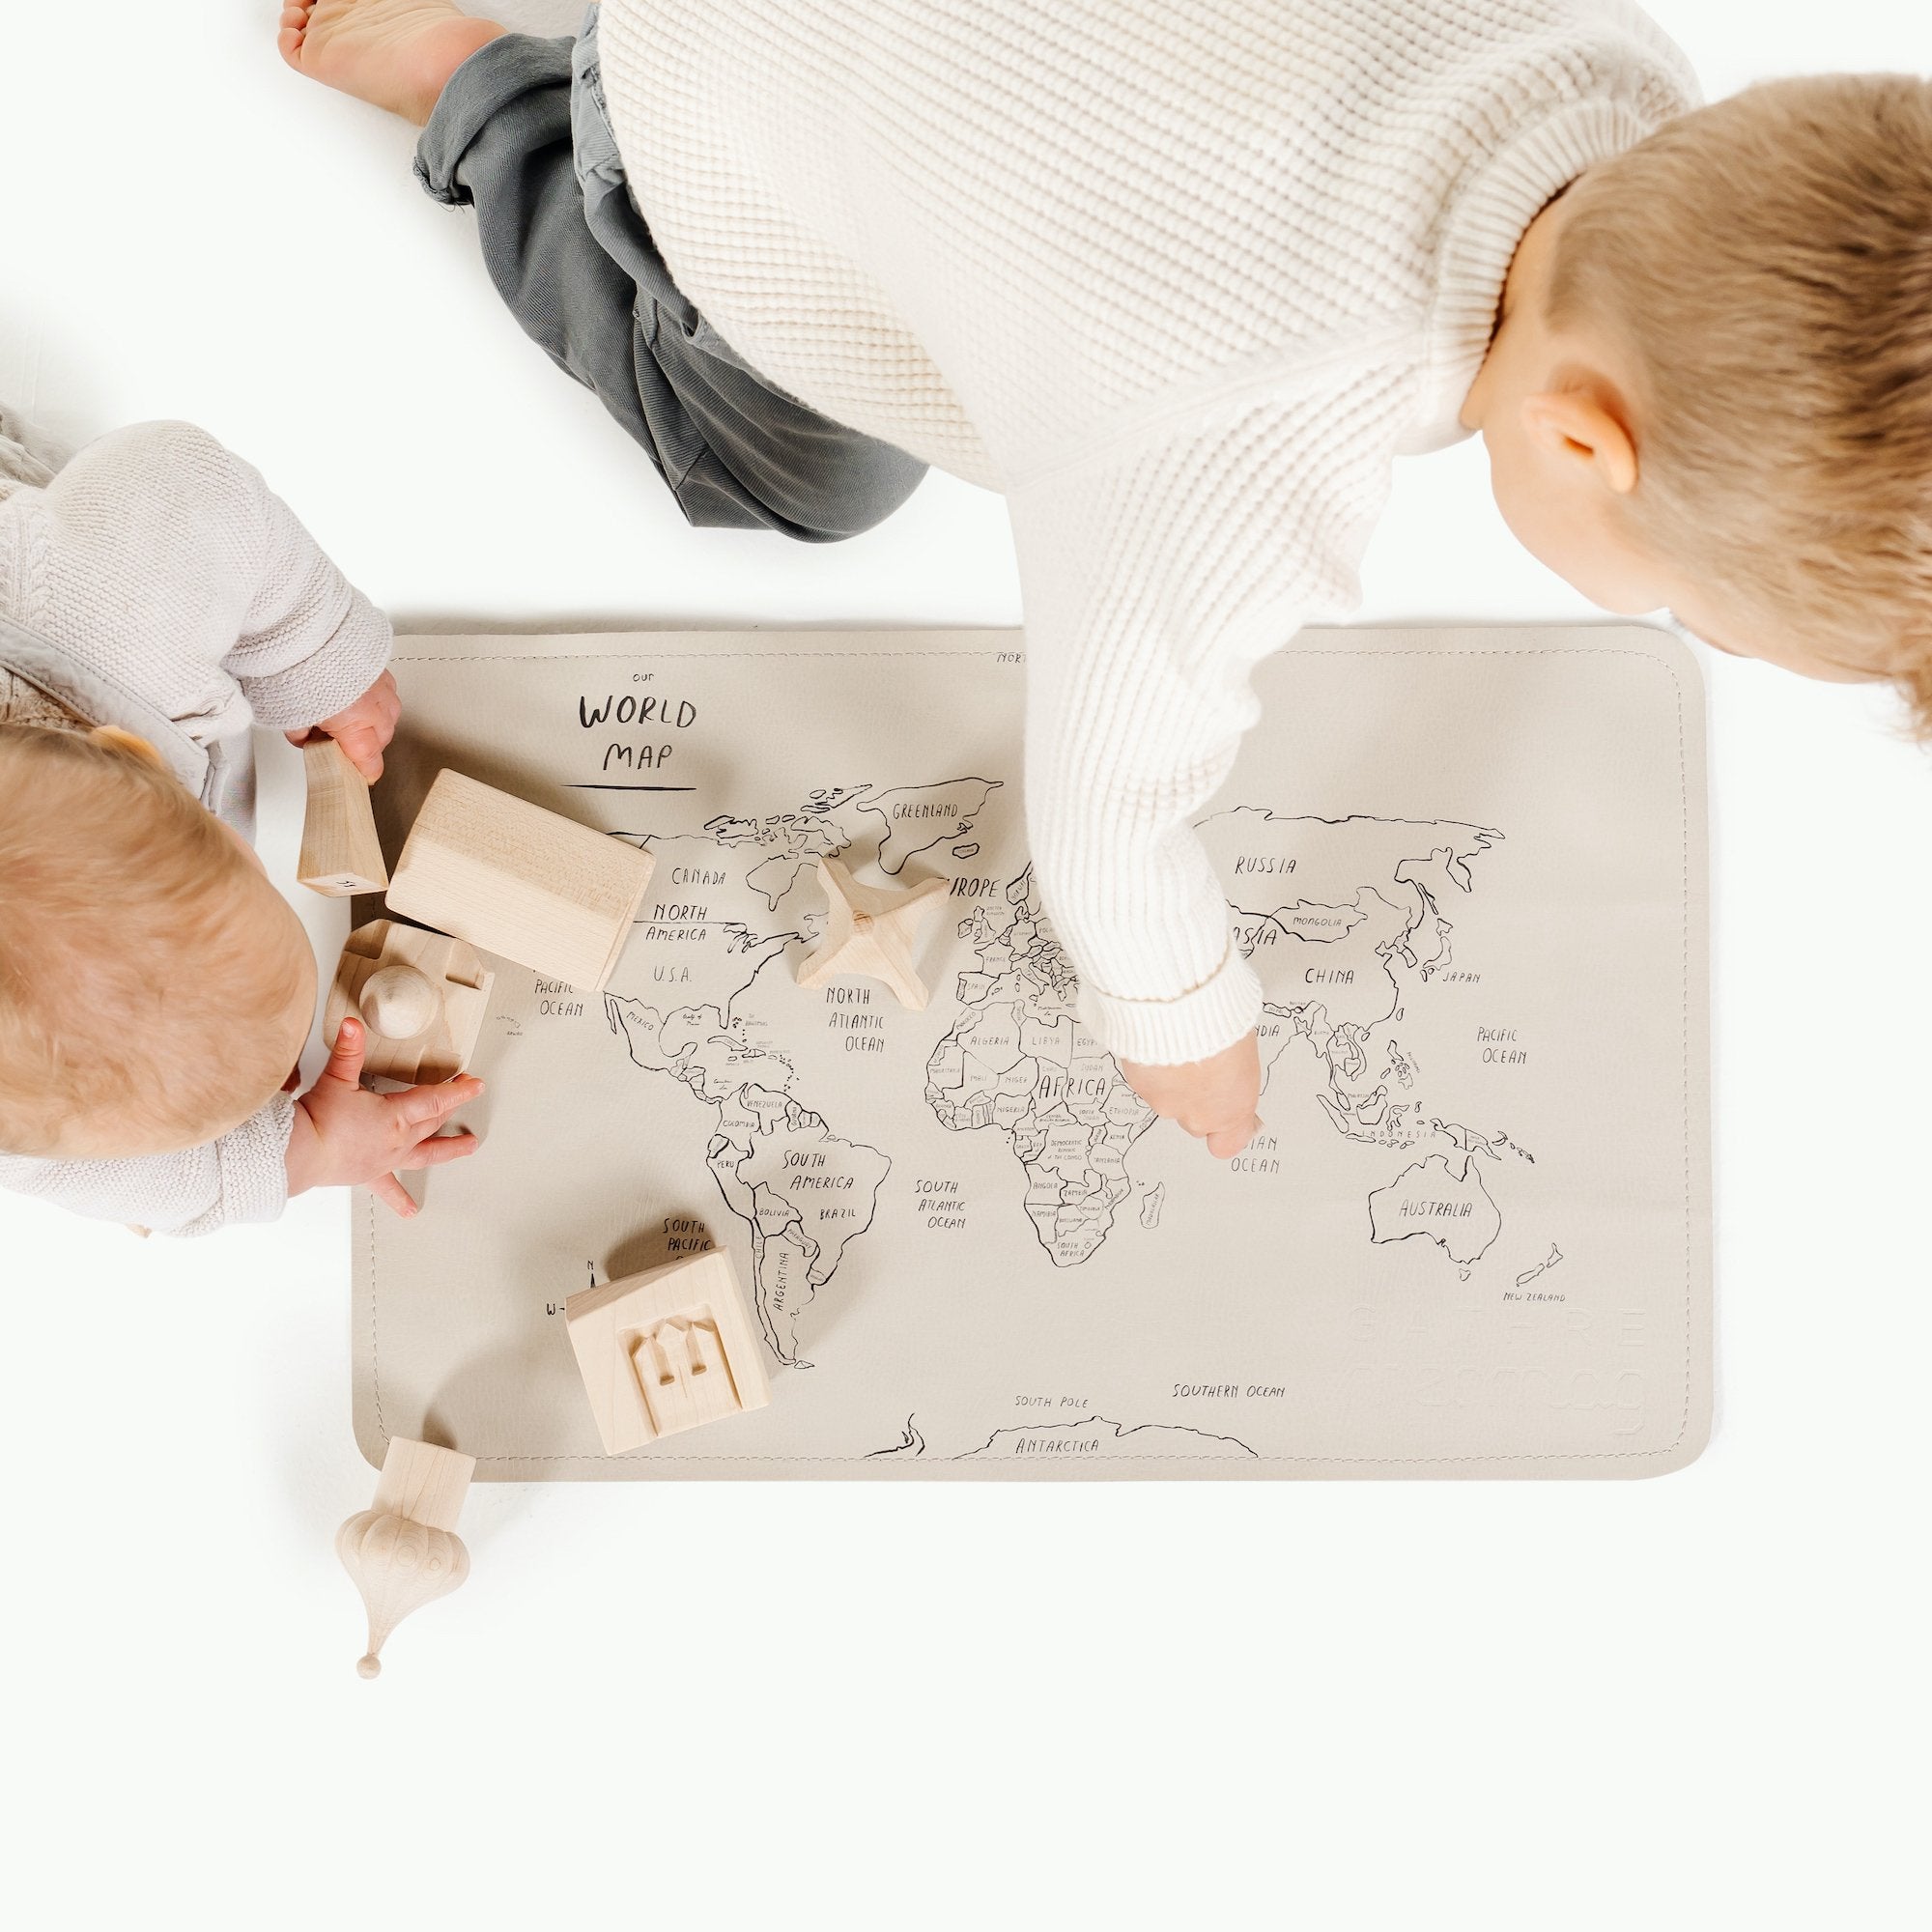 World Map@Overhead baby sitting on the World Map Micro mat